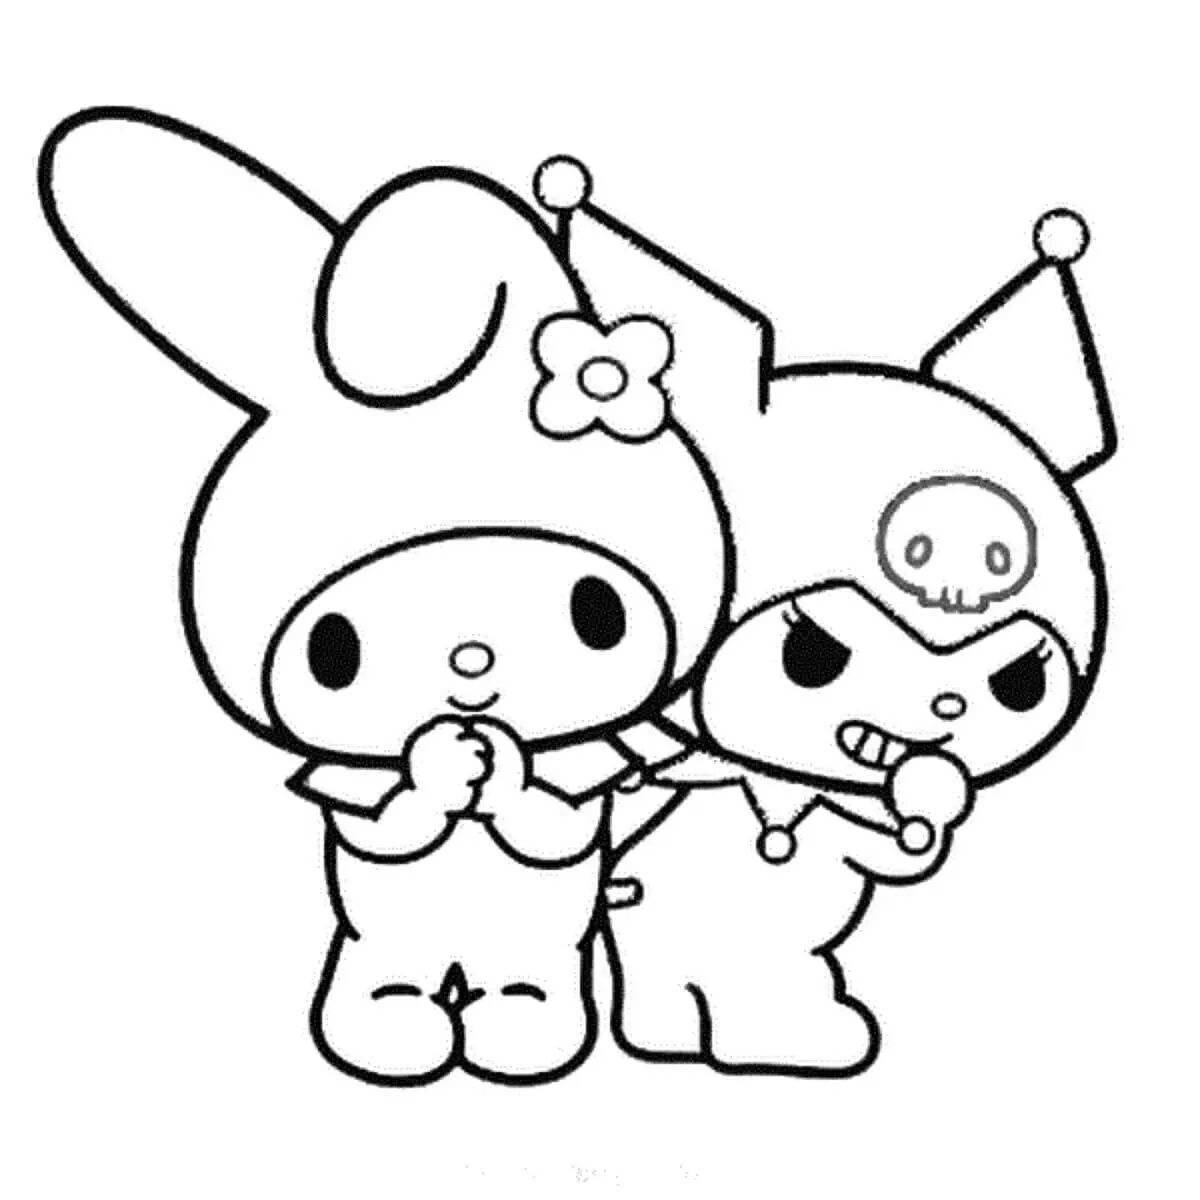 Color-mania chickens and hello kitty coloring page